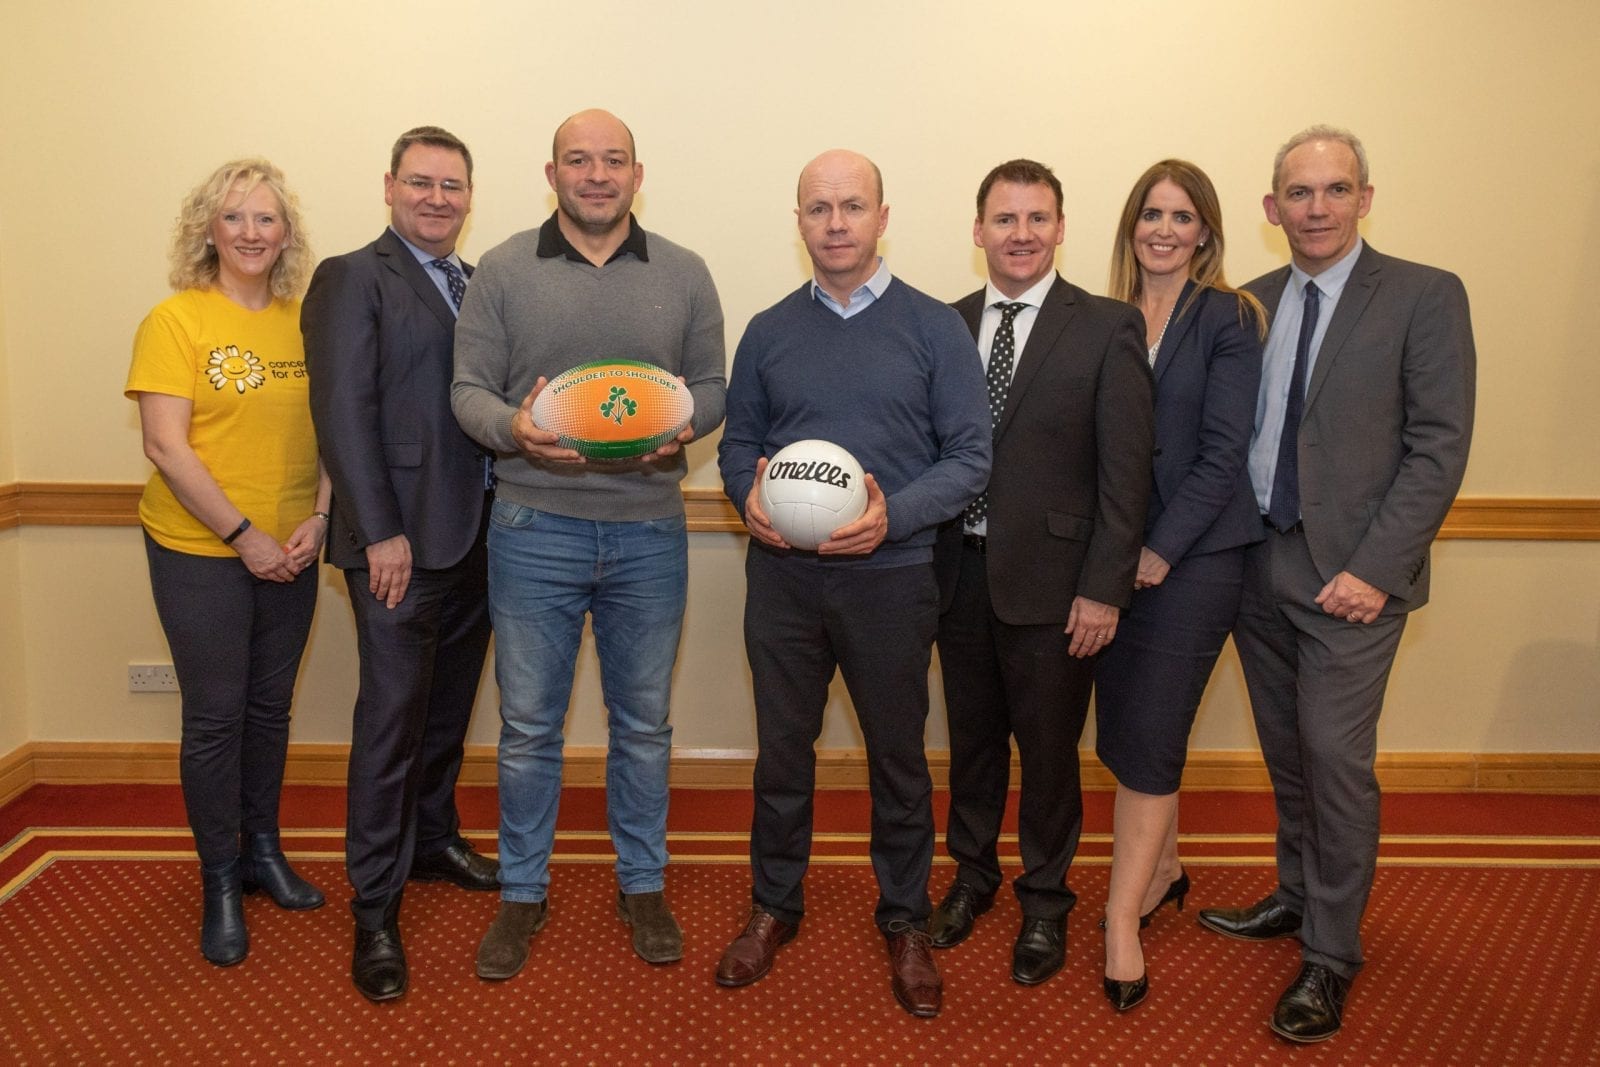 Rory Best & Peter Canavan celebrating An Evening of 2 Halves with JMK Solicitors and CRASH Services